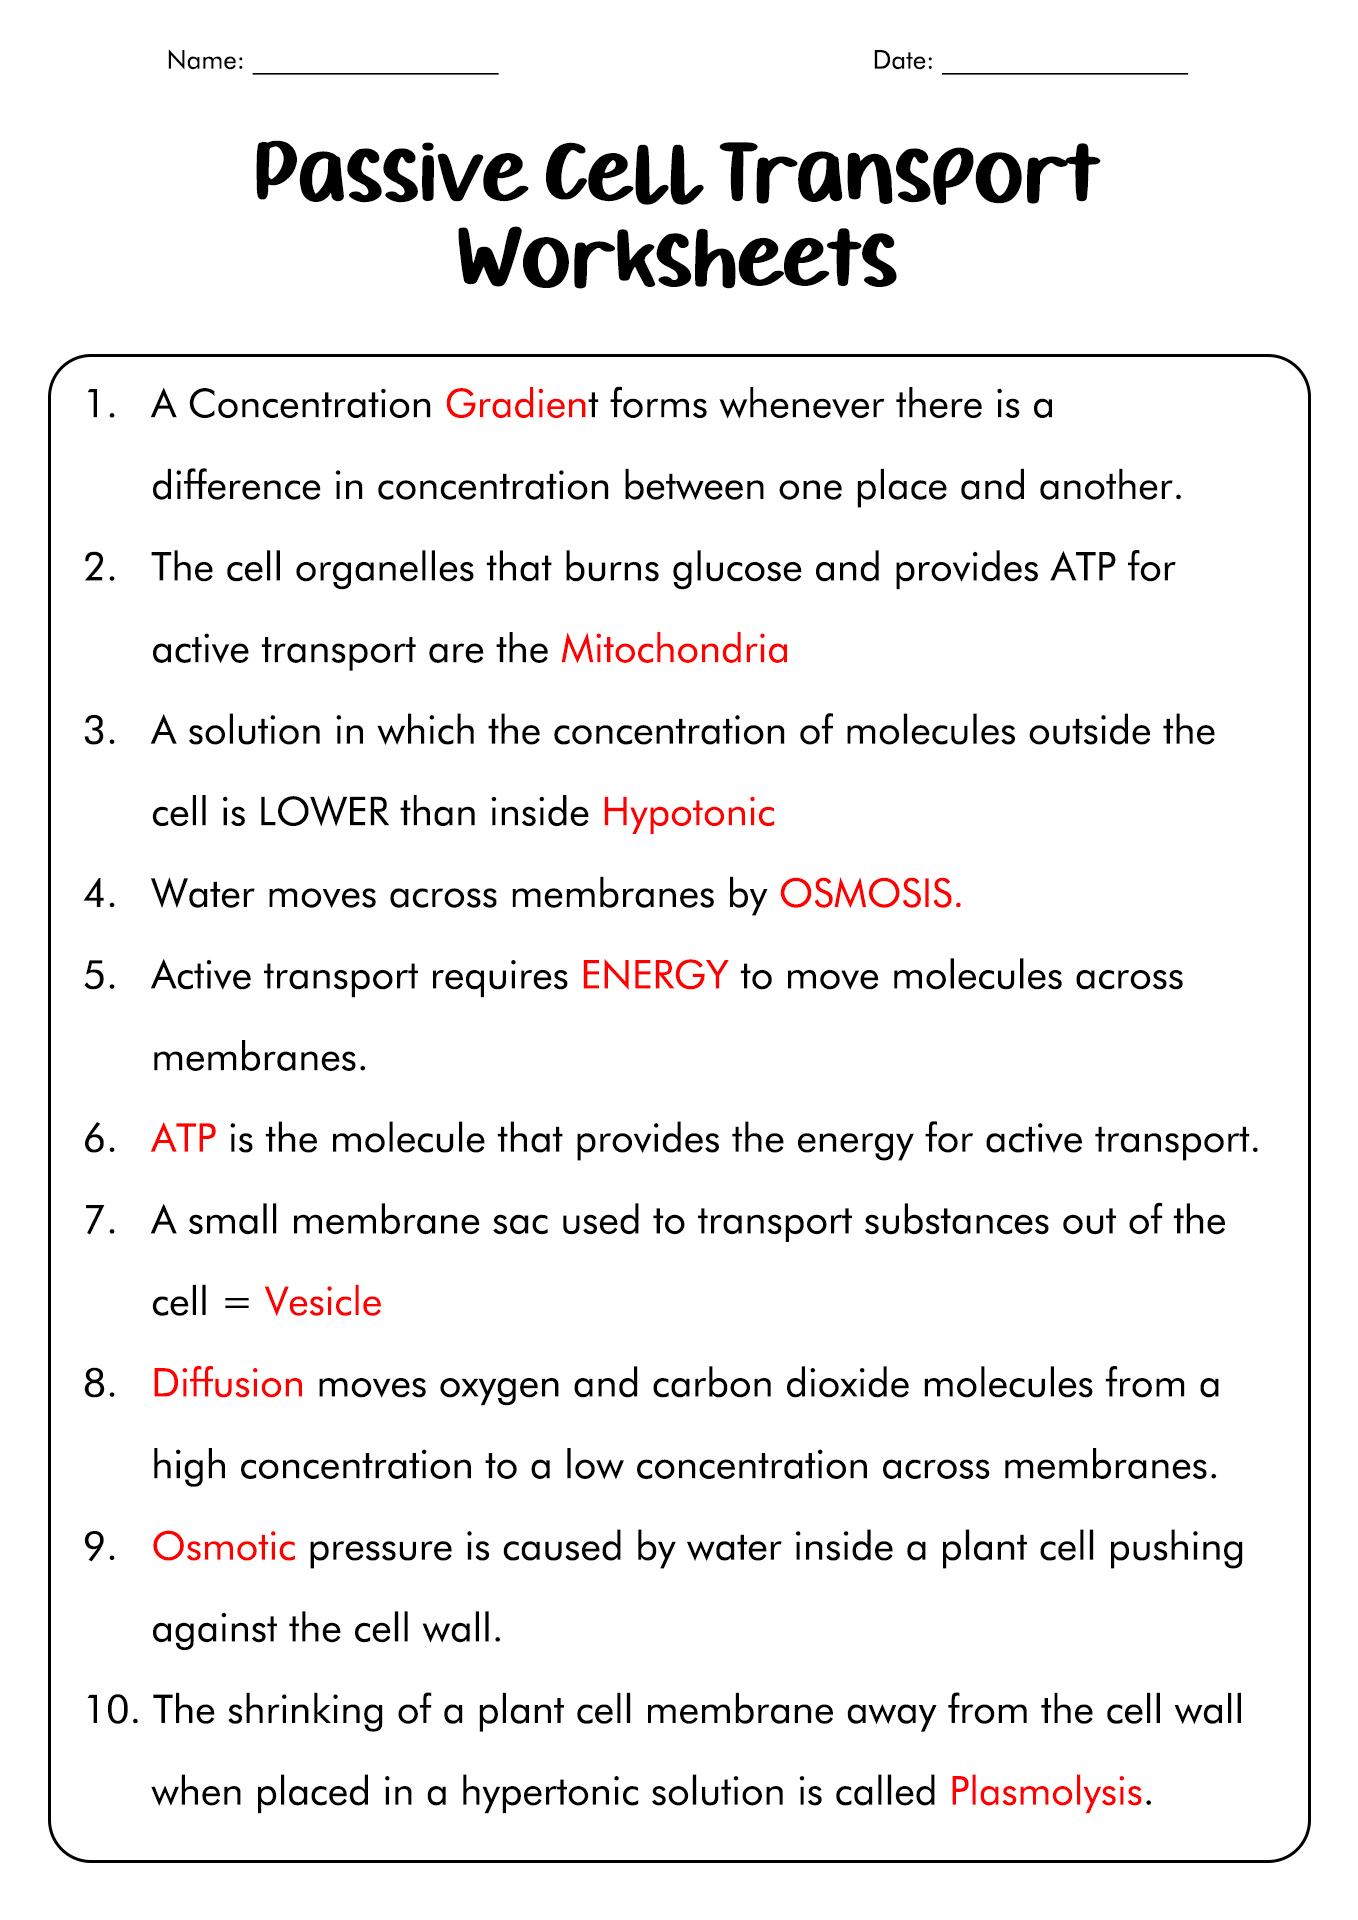 Passive Cell Transport Worksheet Answers